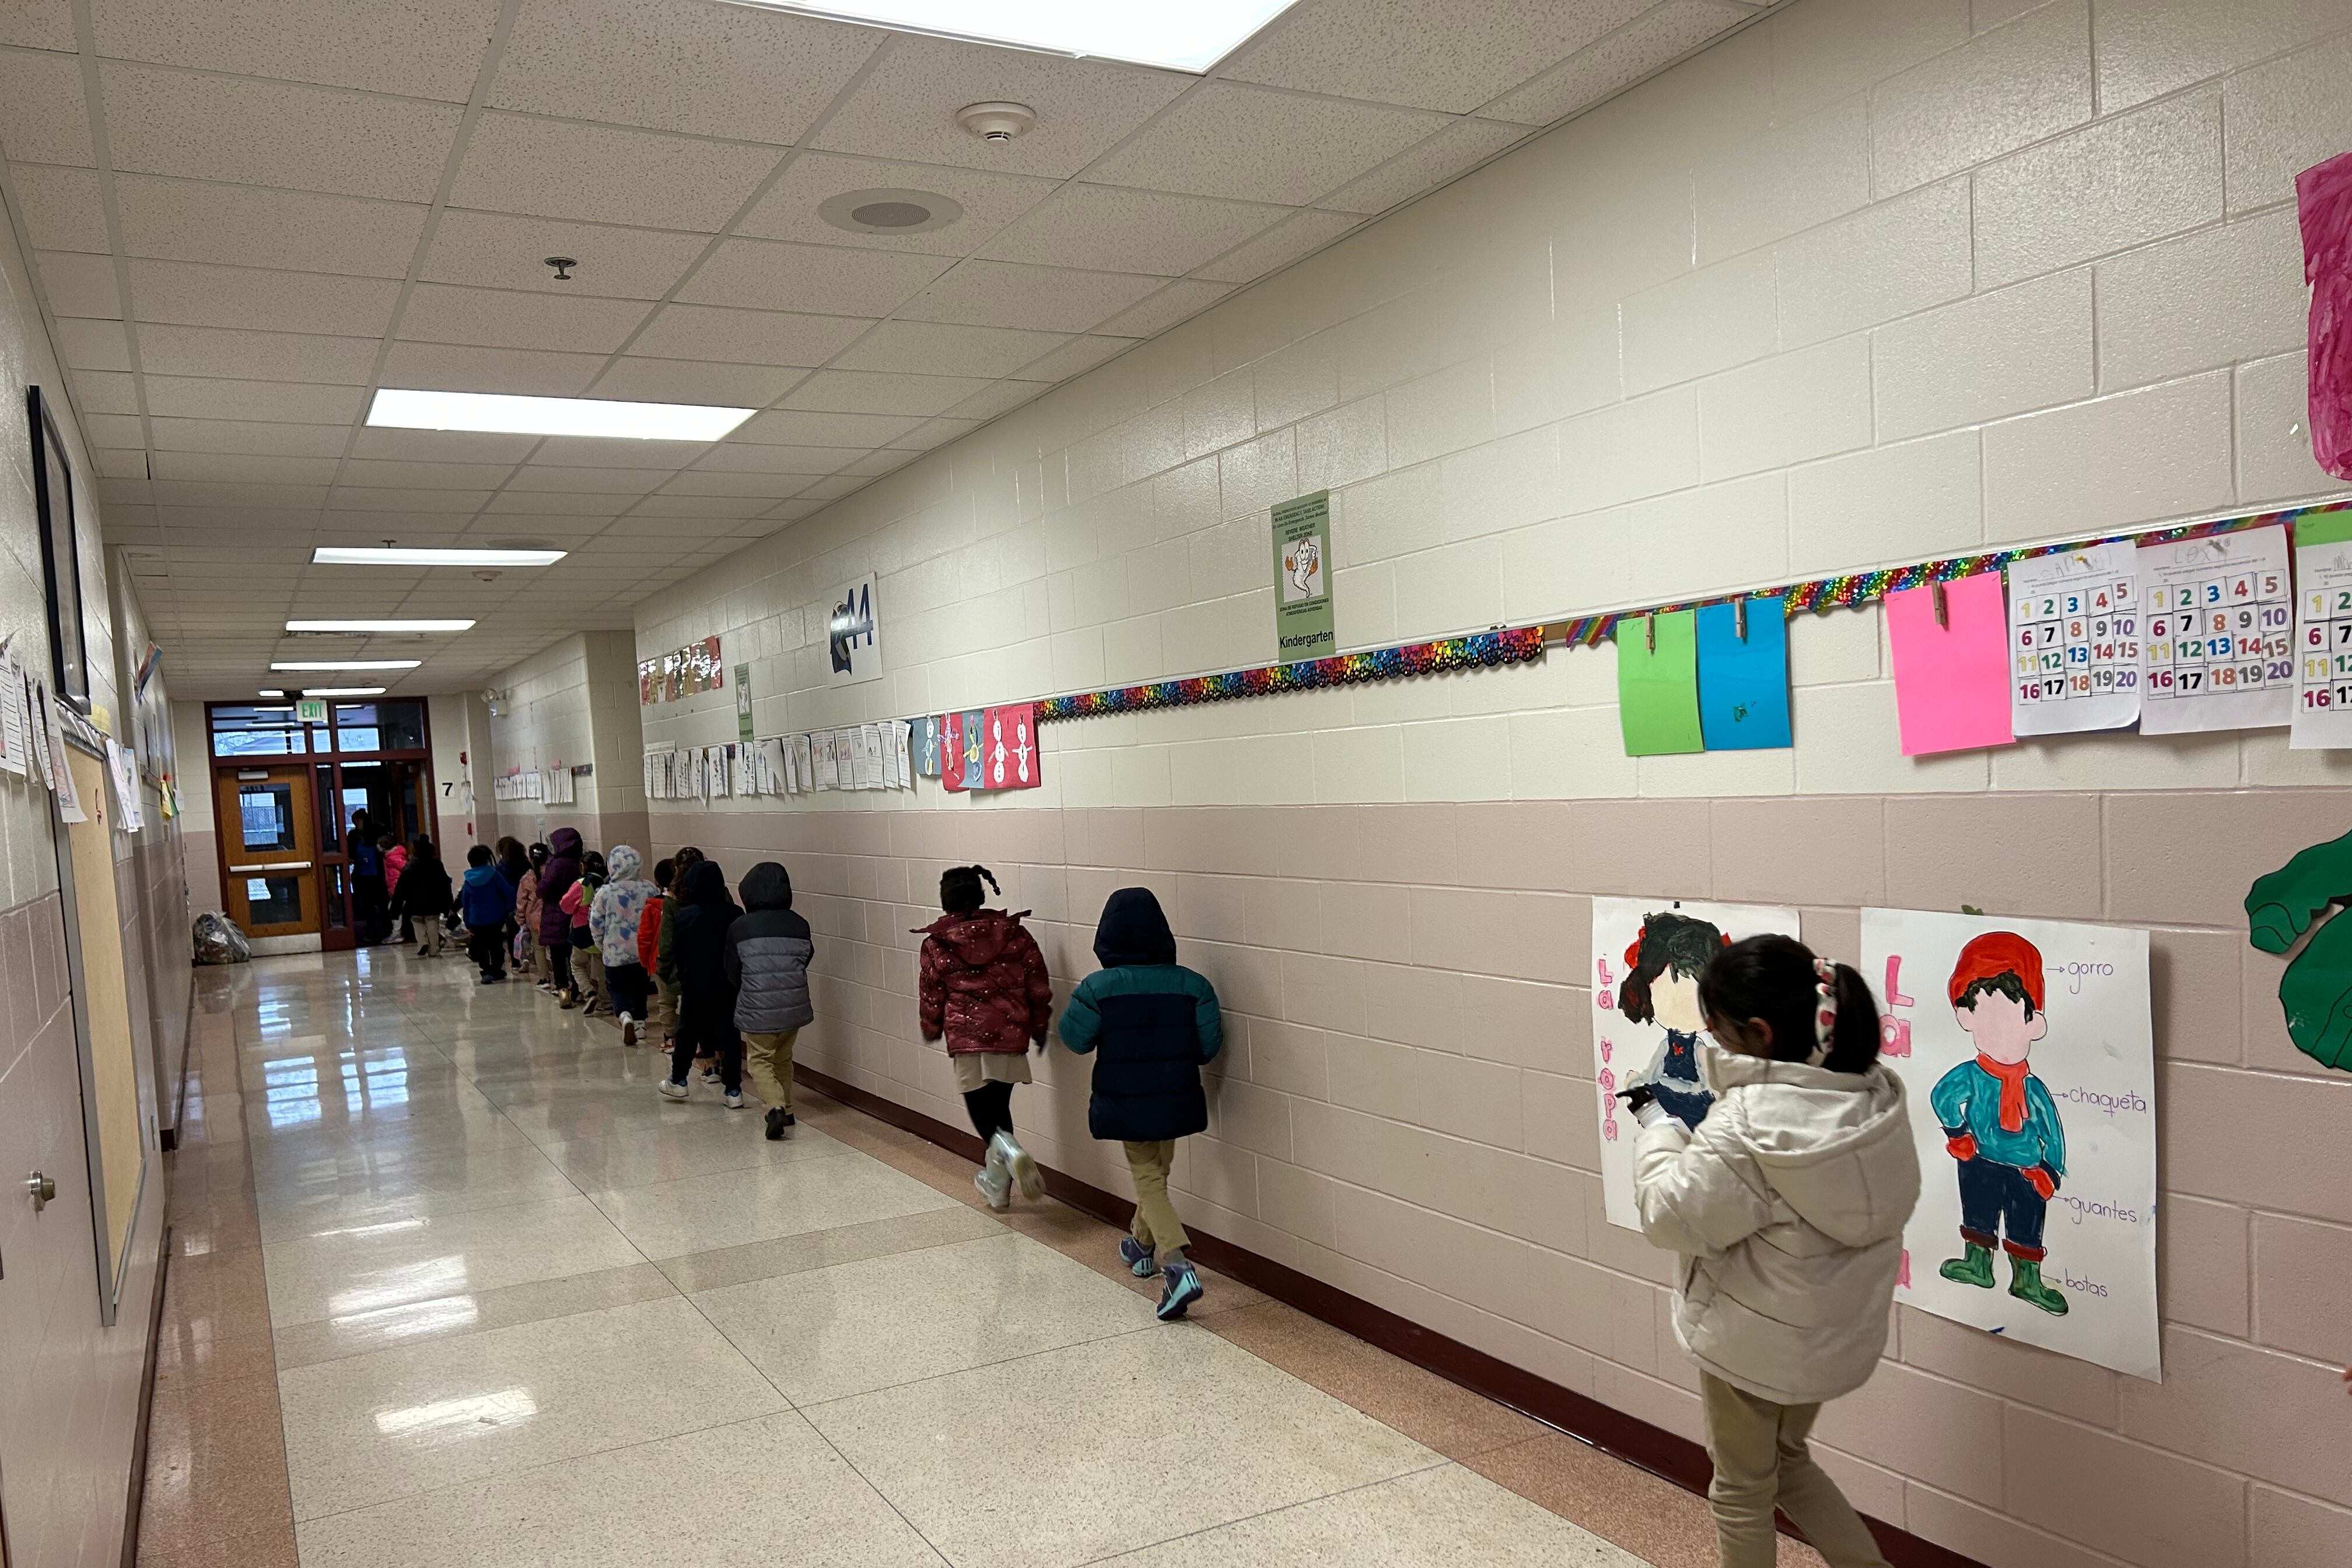 Students walk along the right side of a school hallway.